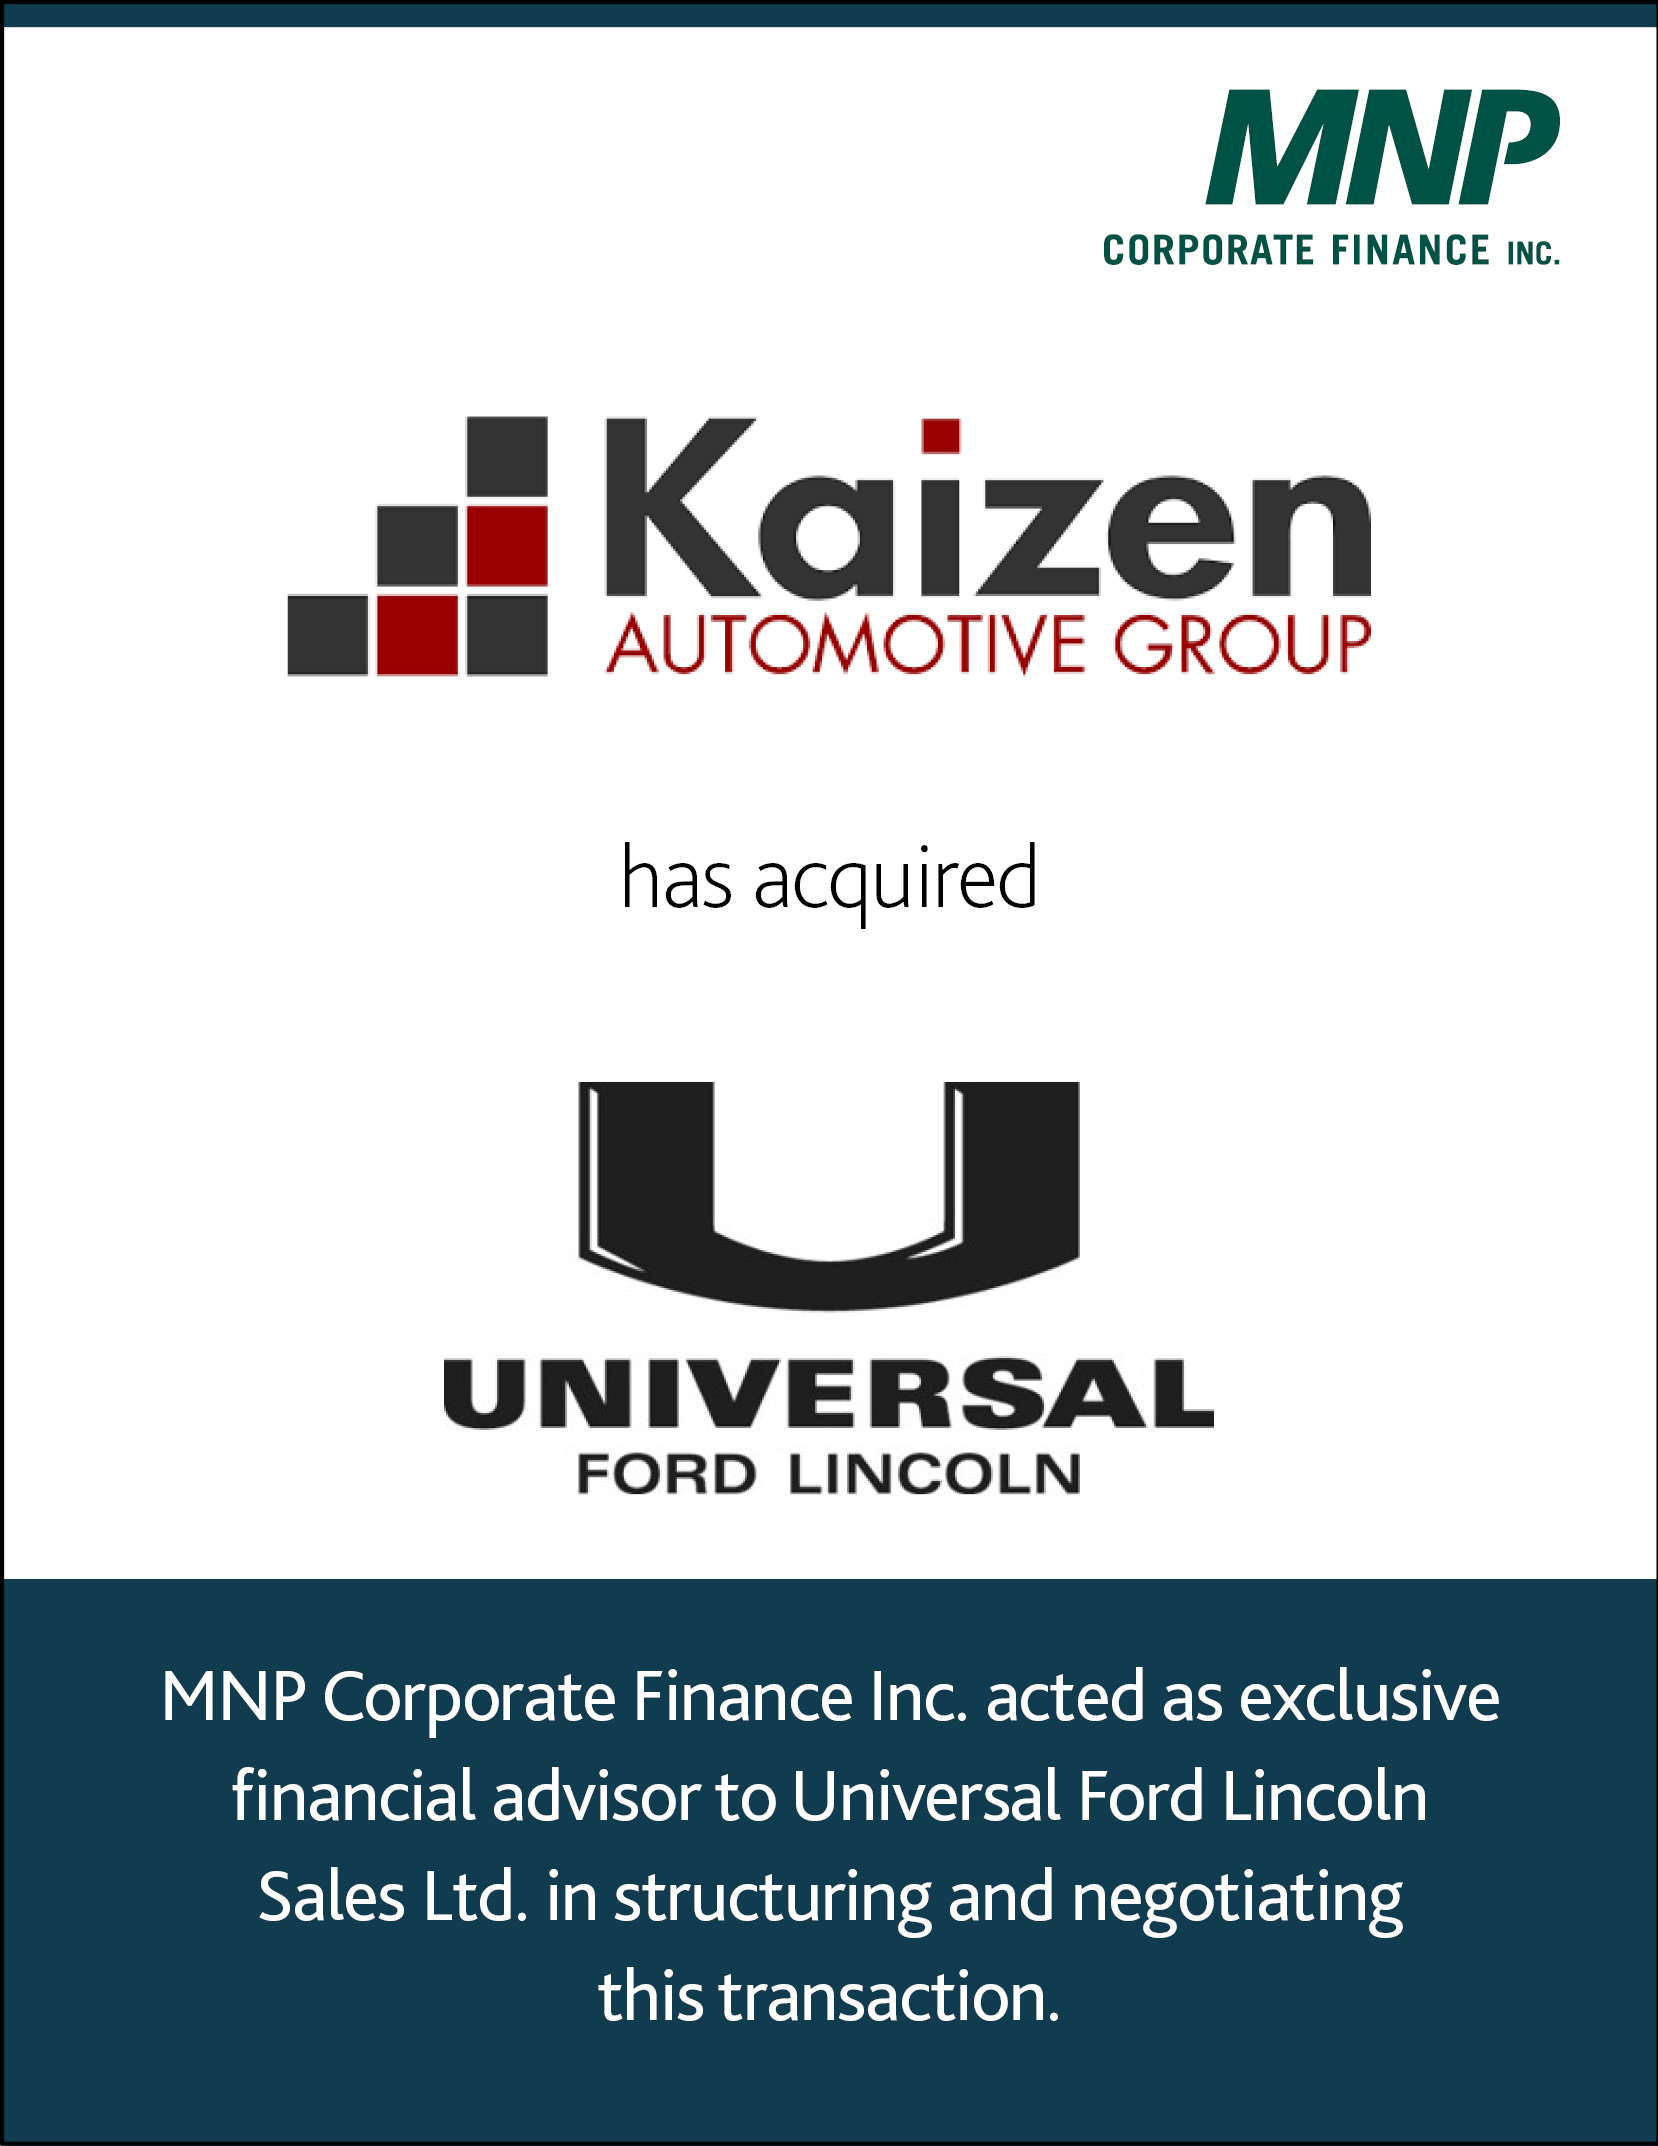 Kaizen Automotive Group has acquired Universal Ford Lincoln Sales Ltd